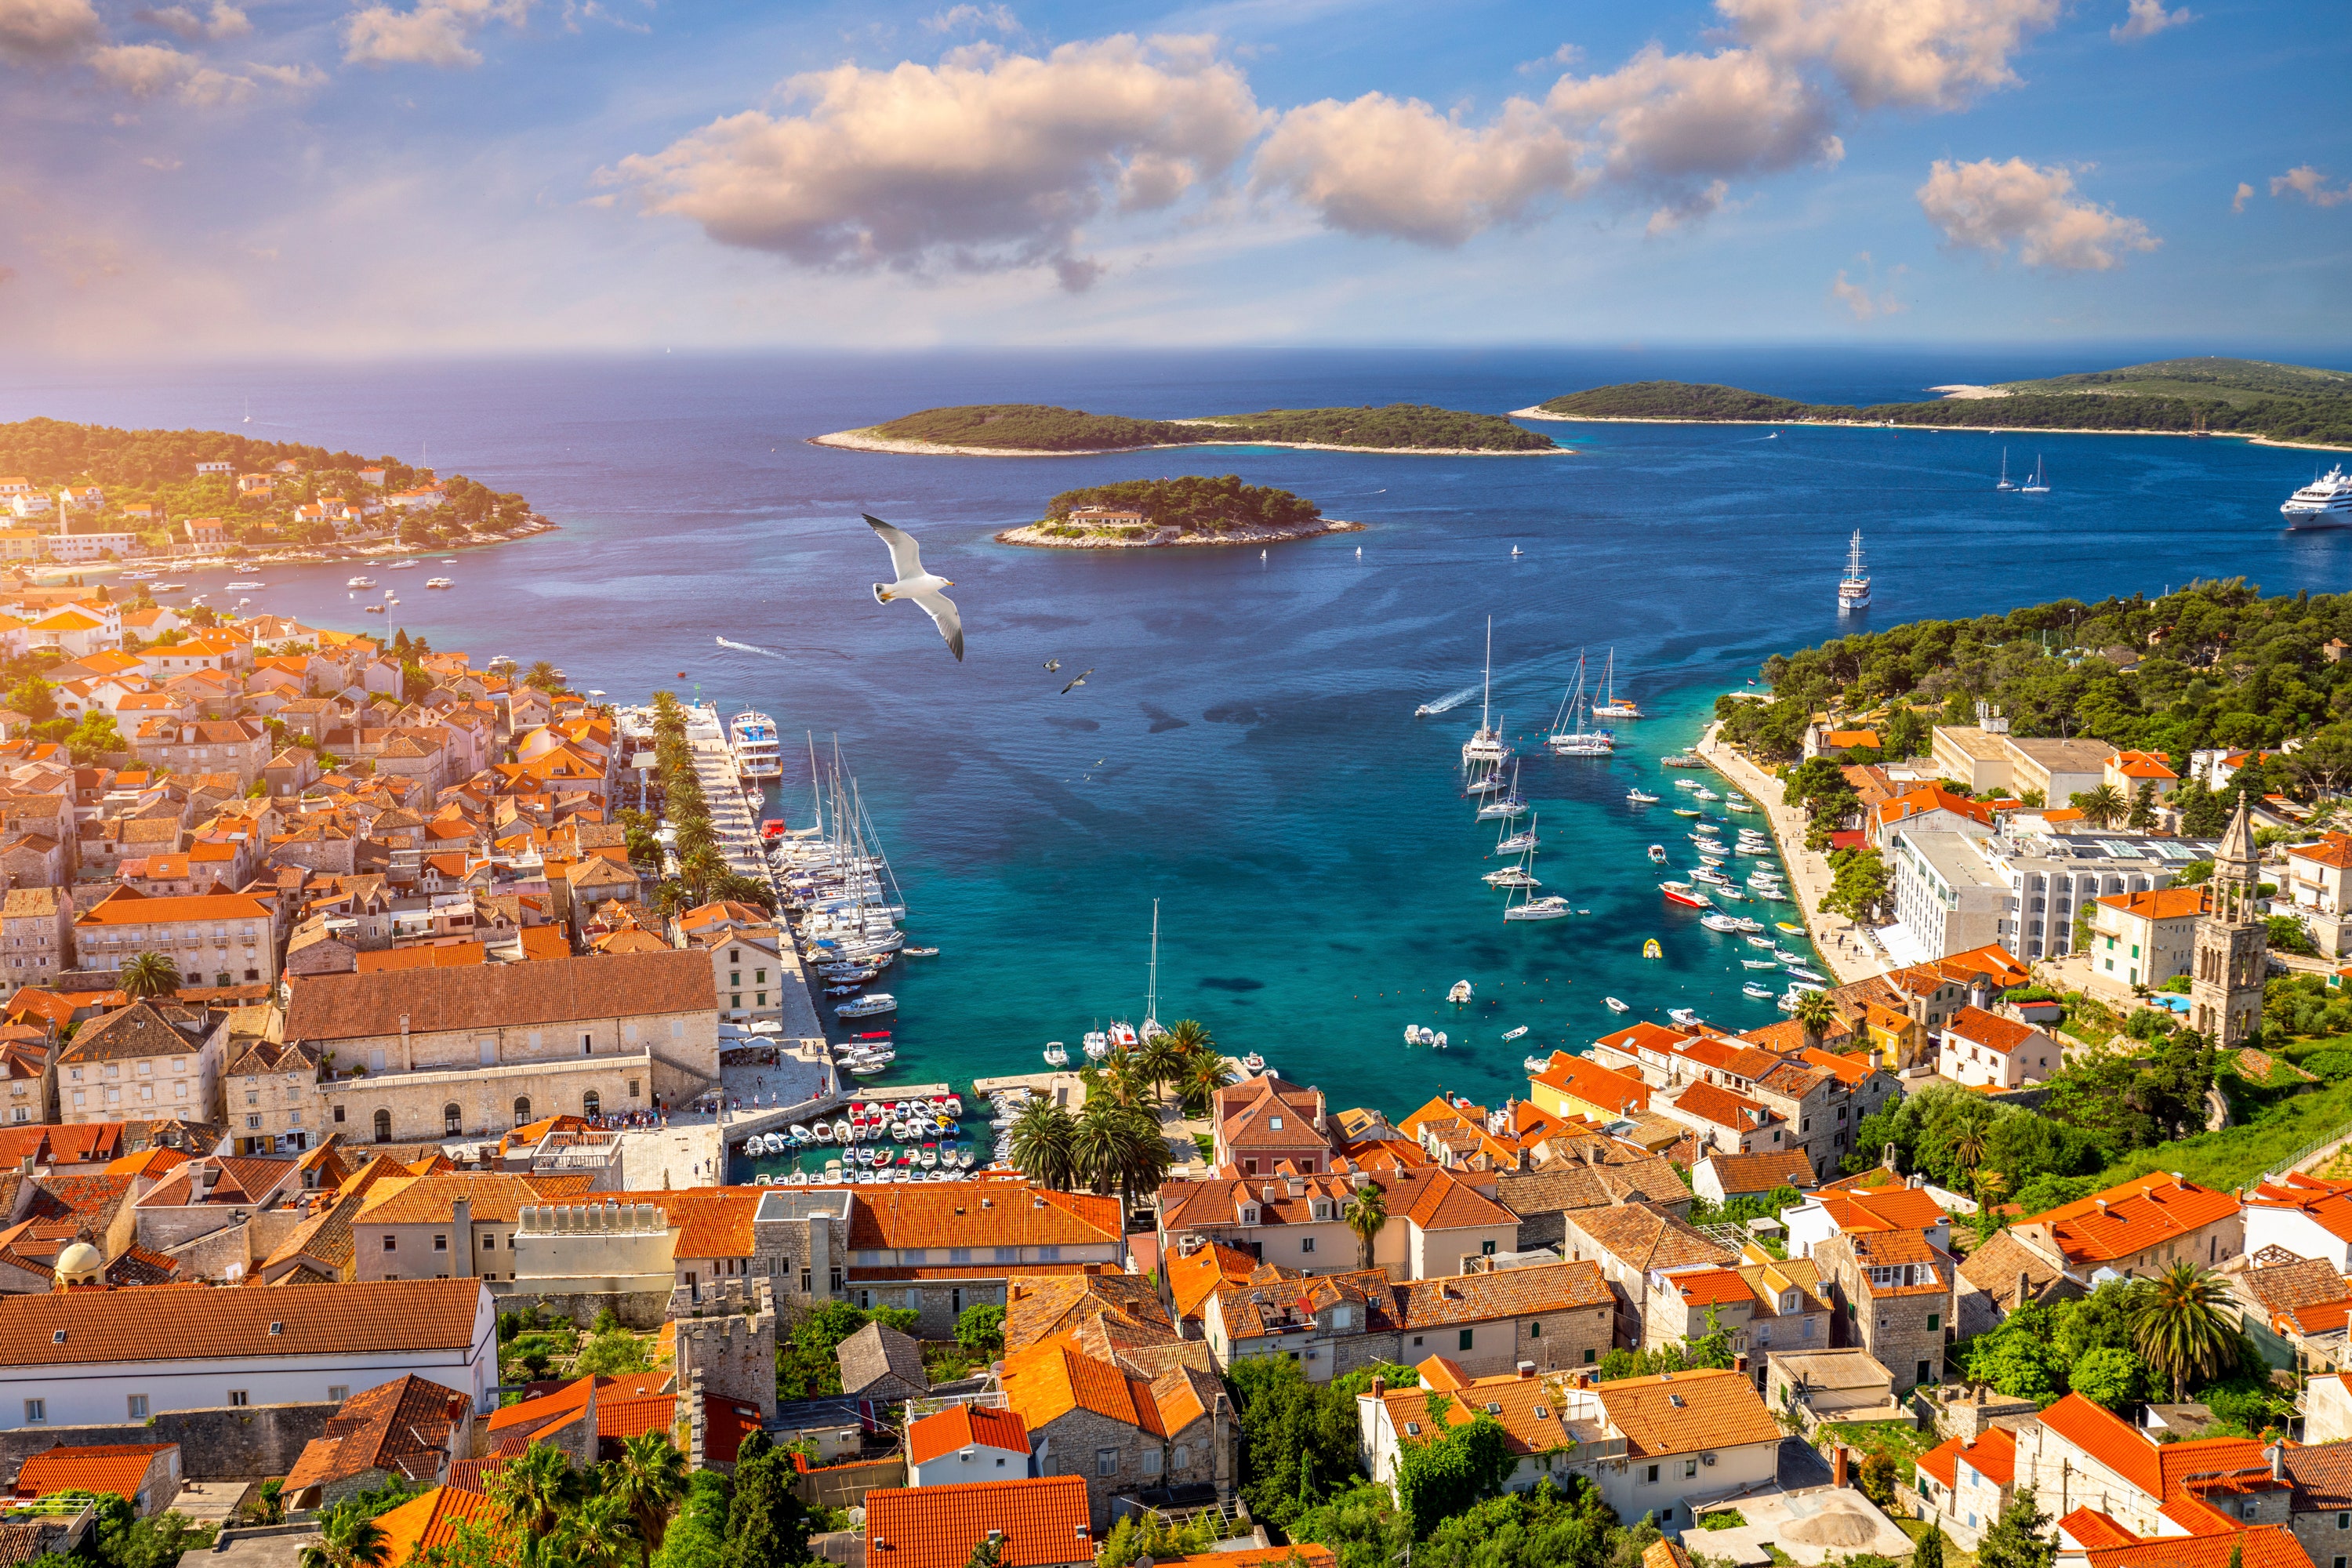 <p>Croatia’s <a href="https://www.cntraveler.com/story/croatia-road-trip-along-dalmatian-coast?mbid=synd_msn_rss&utm_source=msn&utm_medium=syndication">Adriatic Coast</a> is home to a vibrant sailing community with picture-perfect weather conditions. Beginner sailors will appreciate the gentle winds of Dubrovnik, the Split Islands, and <a href="https://www.cntraveler.com/story/sailing-kornati-islands-croatia?mbid=synd_msn_rss&utm_source=msn&utm_medium=syndication">Kornati National Park</a>, whose sheltered coves and bays supply calm and predictable winds. Enjoy incredible natural wonders only accessible by boat, like the famous Blue Cave.</p> <p>Student sailors can earn beginner, intermediate, and advanced ASA certifications aboard 8-day <a href="https://cna.st/affiliate-link/5562jUBkjoEKArhzrbgC62GDyQqQ2hWgRB2cRmcNaRdd2si9Y7MuUne2GffU3tDsKABSfiqXvEk5G8nz6cTbskLAwu7Pj31ETNPzEGPPG6L1qqaSqAQe7KY6aDe11Qx7TADrodLEMe1UVNnQLyAkGkiX9UiyC8yrZpAiAApG9SKSpD9RiRpXhWLXzUE5W4AuVJk5tS1CE" rel="sponsored">learn to sail vacations</a> in July, August, and September 2024. Hosted by American Sailing partner Sailing Virgins, the catamaran and monohull ships—each a minimum of 40 feet with 3-5 cabins—visit the <a href="https://www.cntraveler.com/gallery/the-most-beautiful-islands-in-croatia?mbid=synd_msn_rss&utm_source=msn&utm_medium=syndication">Croatian islands</a> of Brac, Korčula, Šćedro, Komiža, Vis, and Hvar.</p><p>Sign up to receive the latest news, expert tips, and inspiration on all things travel</p><a href="https://www.cntraveler.com/newsletter/the-daily?sourceCode=msnsend">Inspire Me</a>